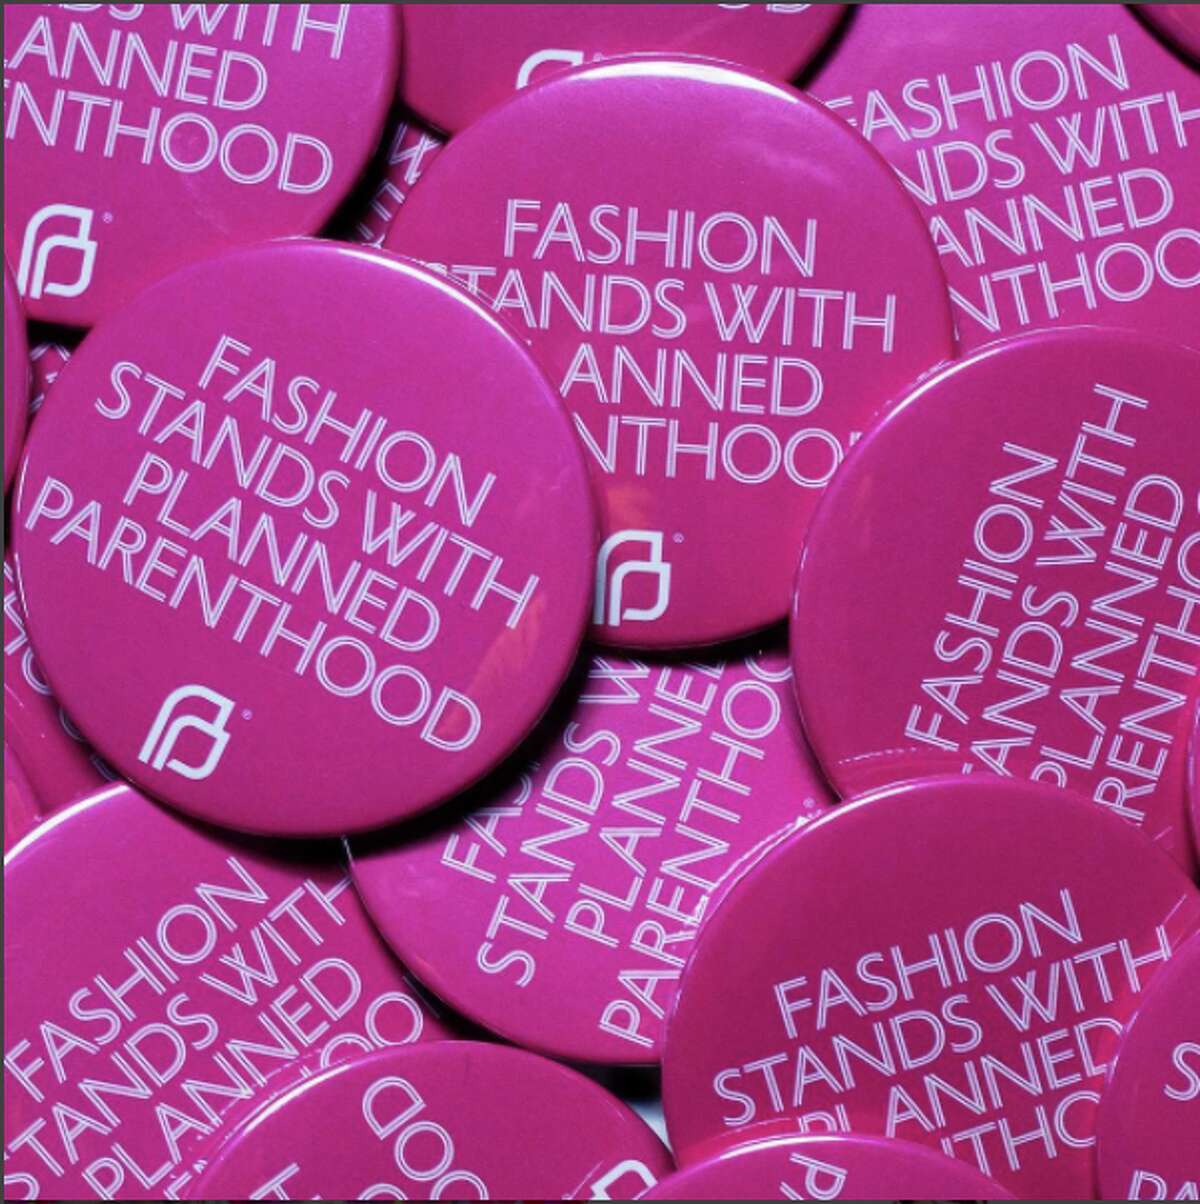 Pins that state "Fashion Stands With Planned Parenthood," will be distributed at New York Fashion Week by the Council of Fashion Designers of America in support of the organization.